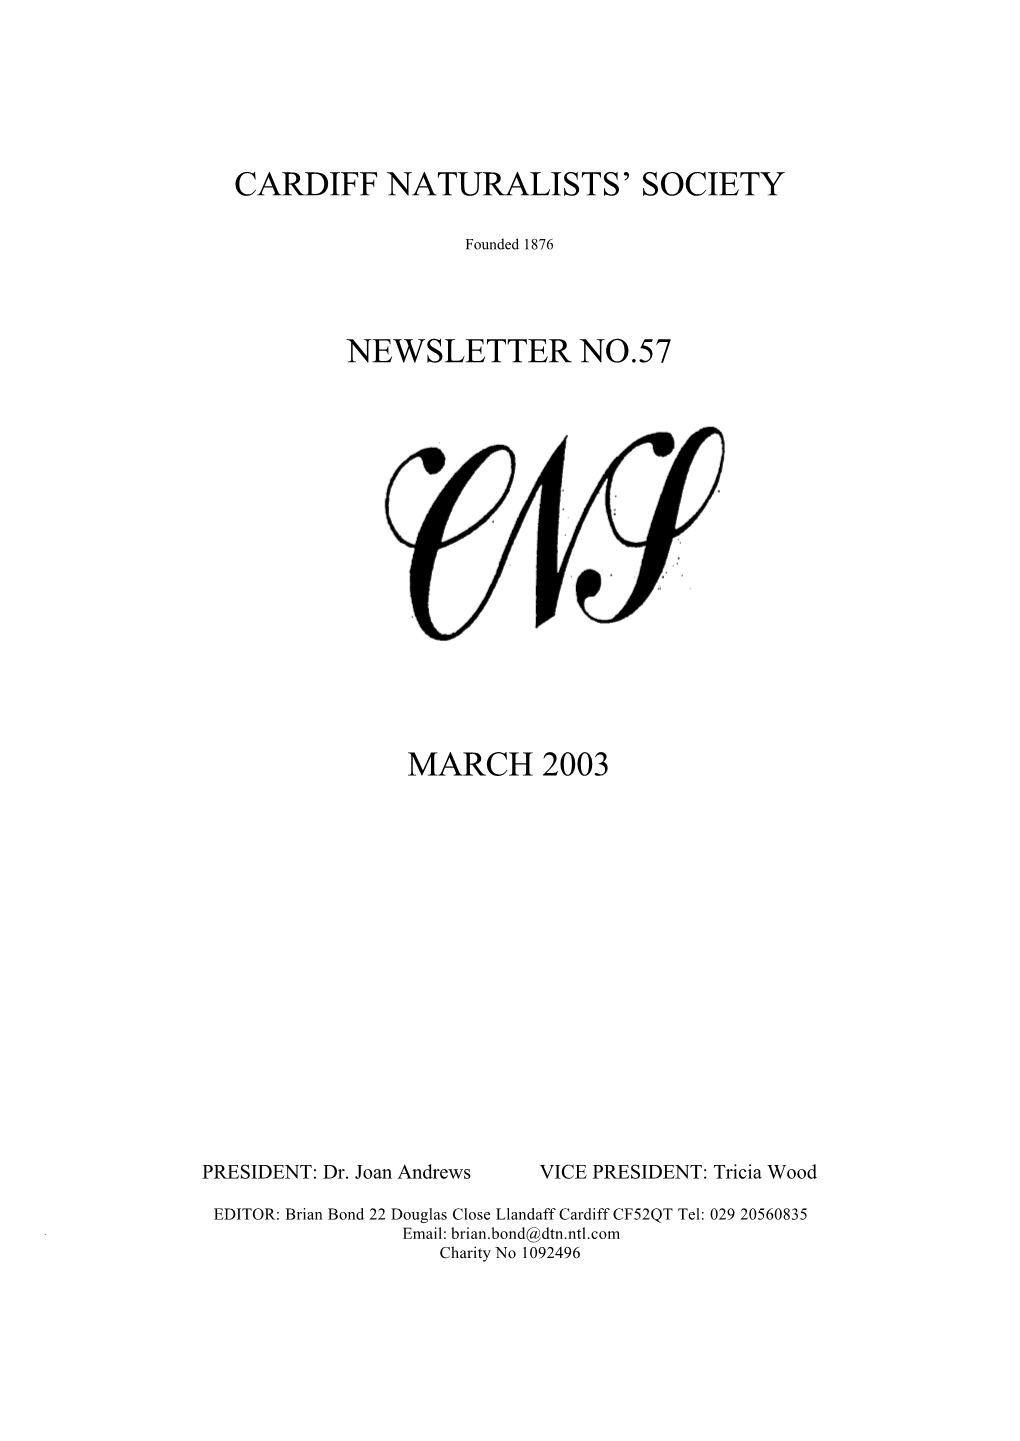 Cardiff Naturalists' Society Newsletter No.57 March 2003